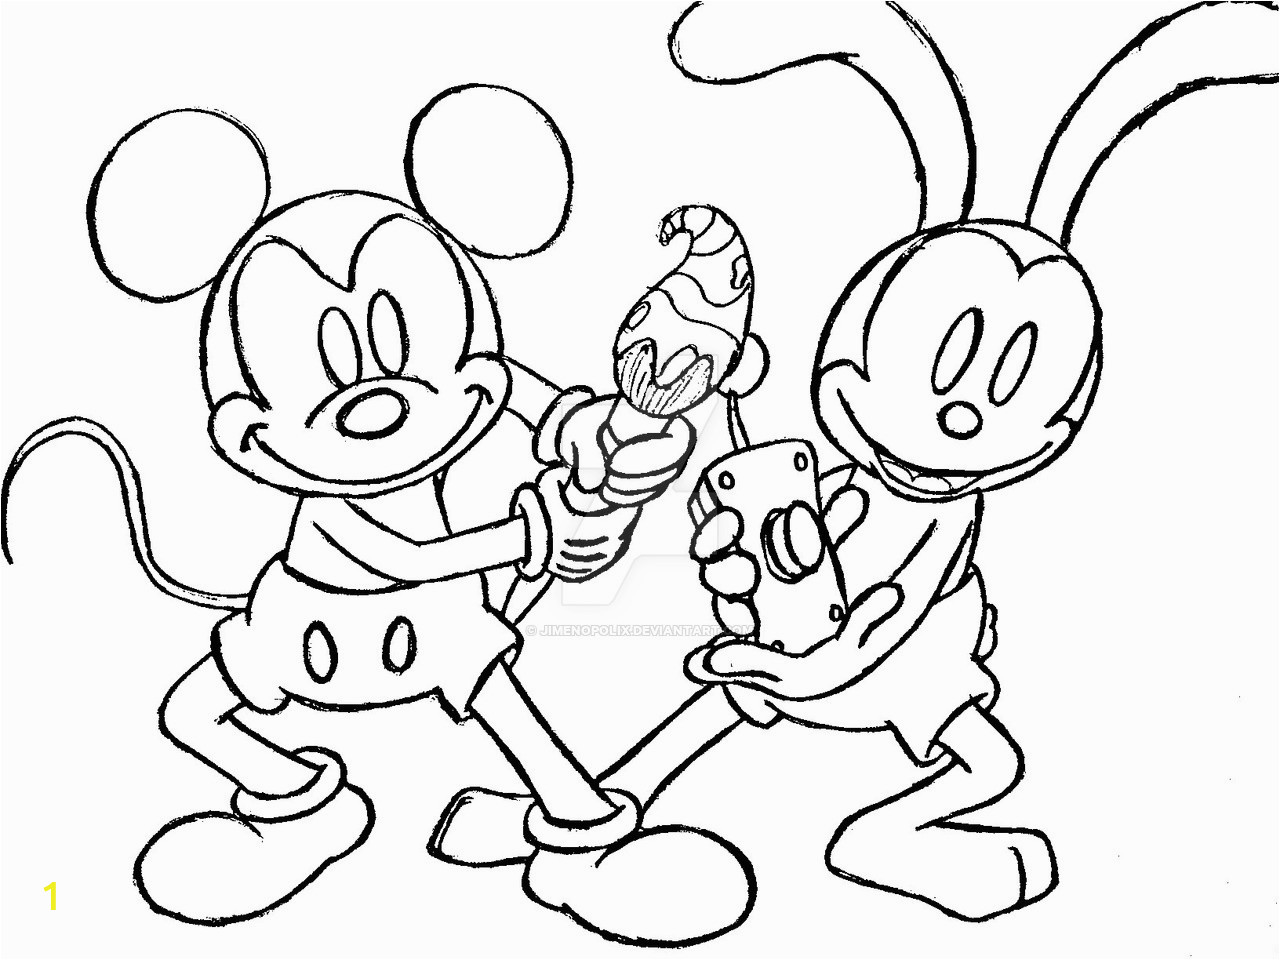 oswald the lucky rabbit coloring pages